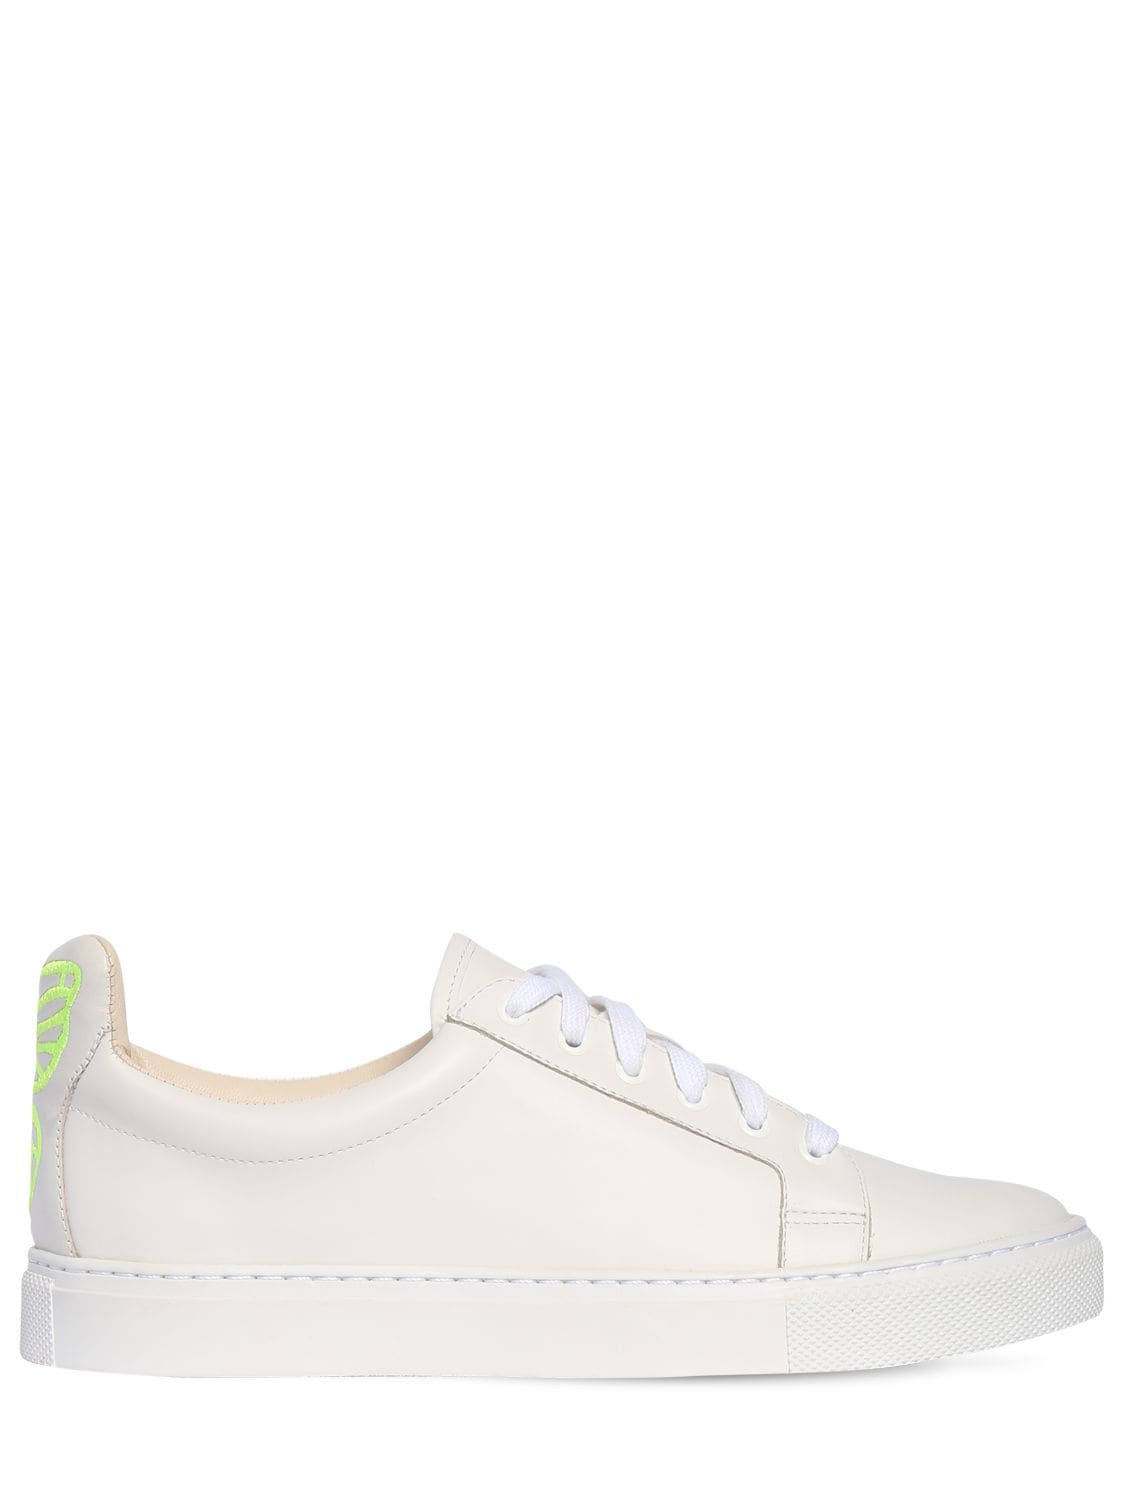 SOPHIA WEBSTER 25MM BUTTERFLY LEATHER trainers,71II7Q012-V0HJVEU1